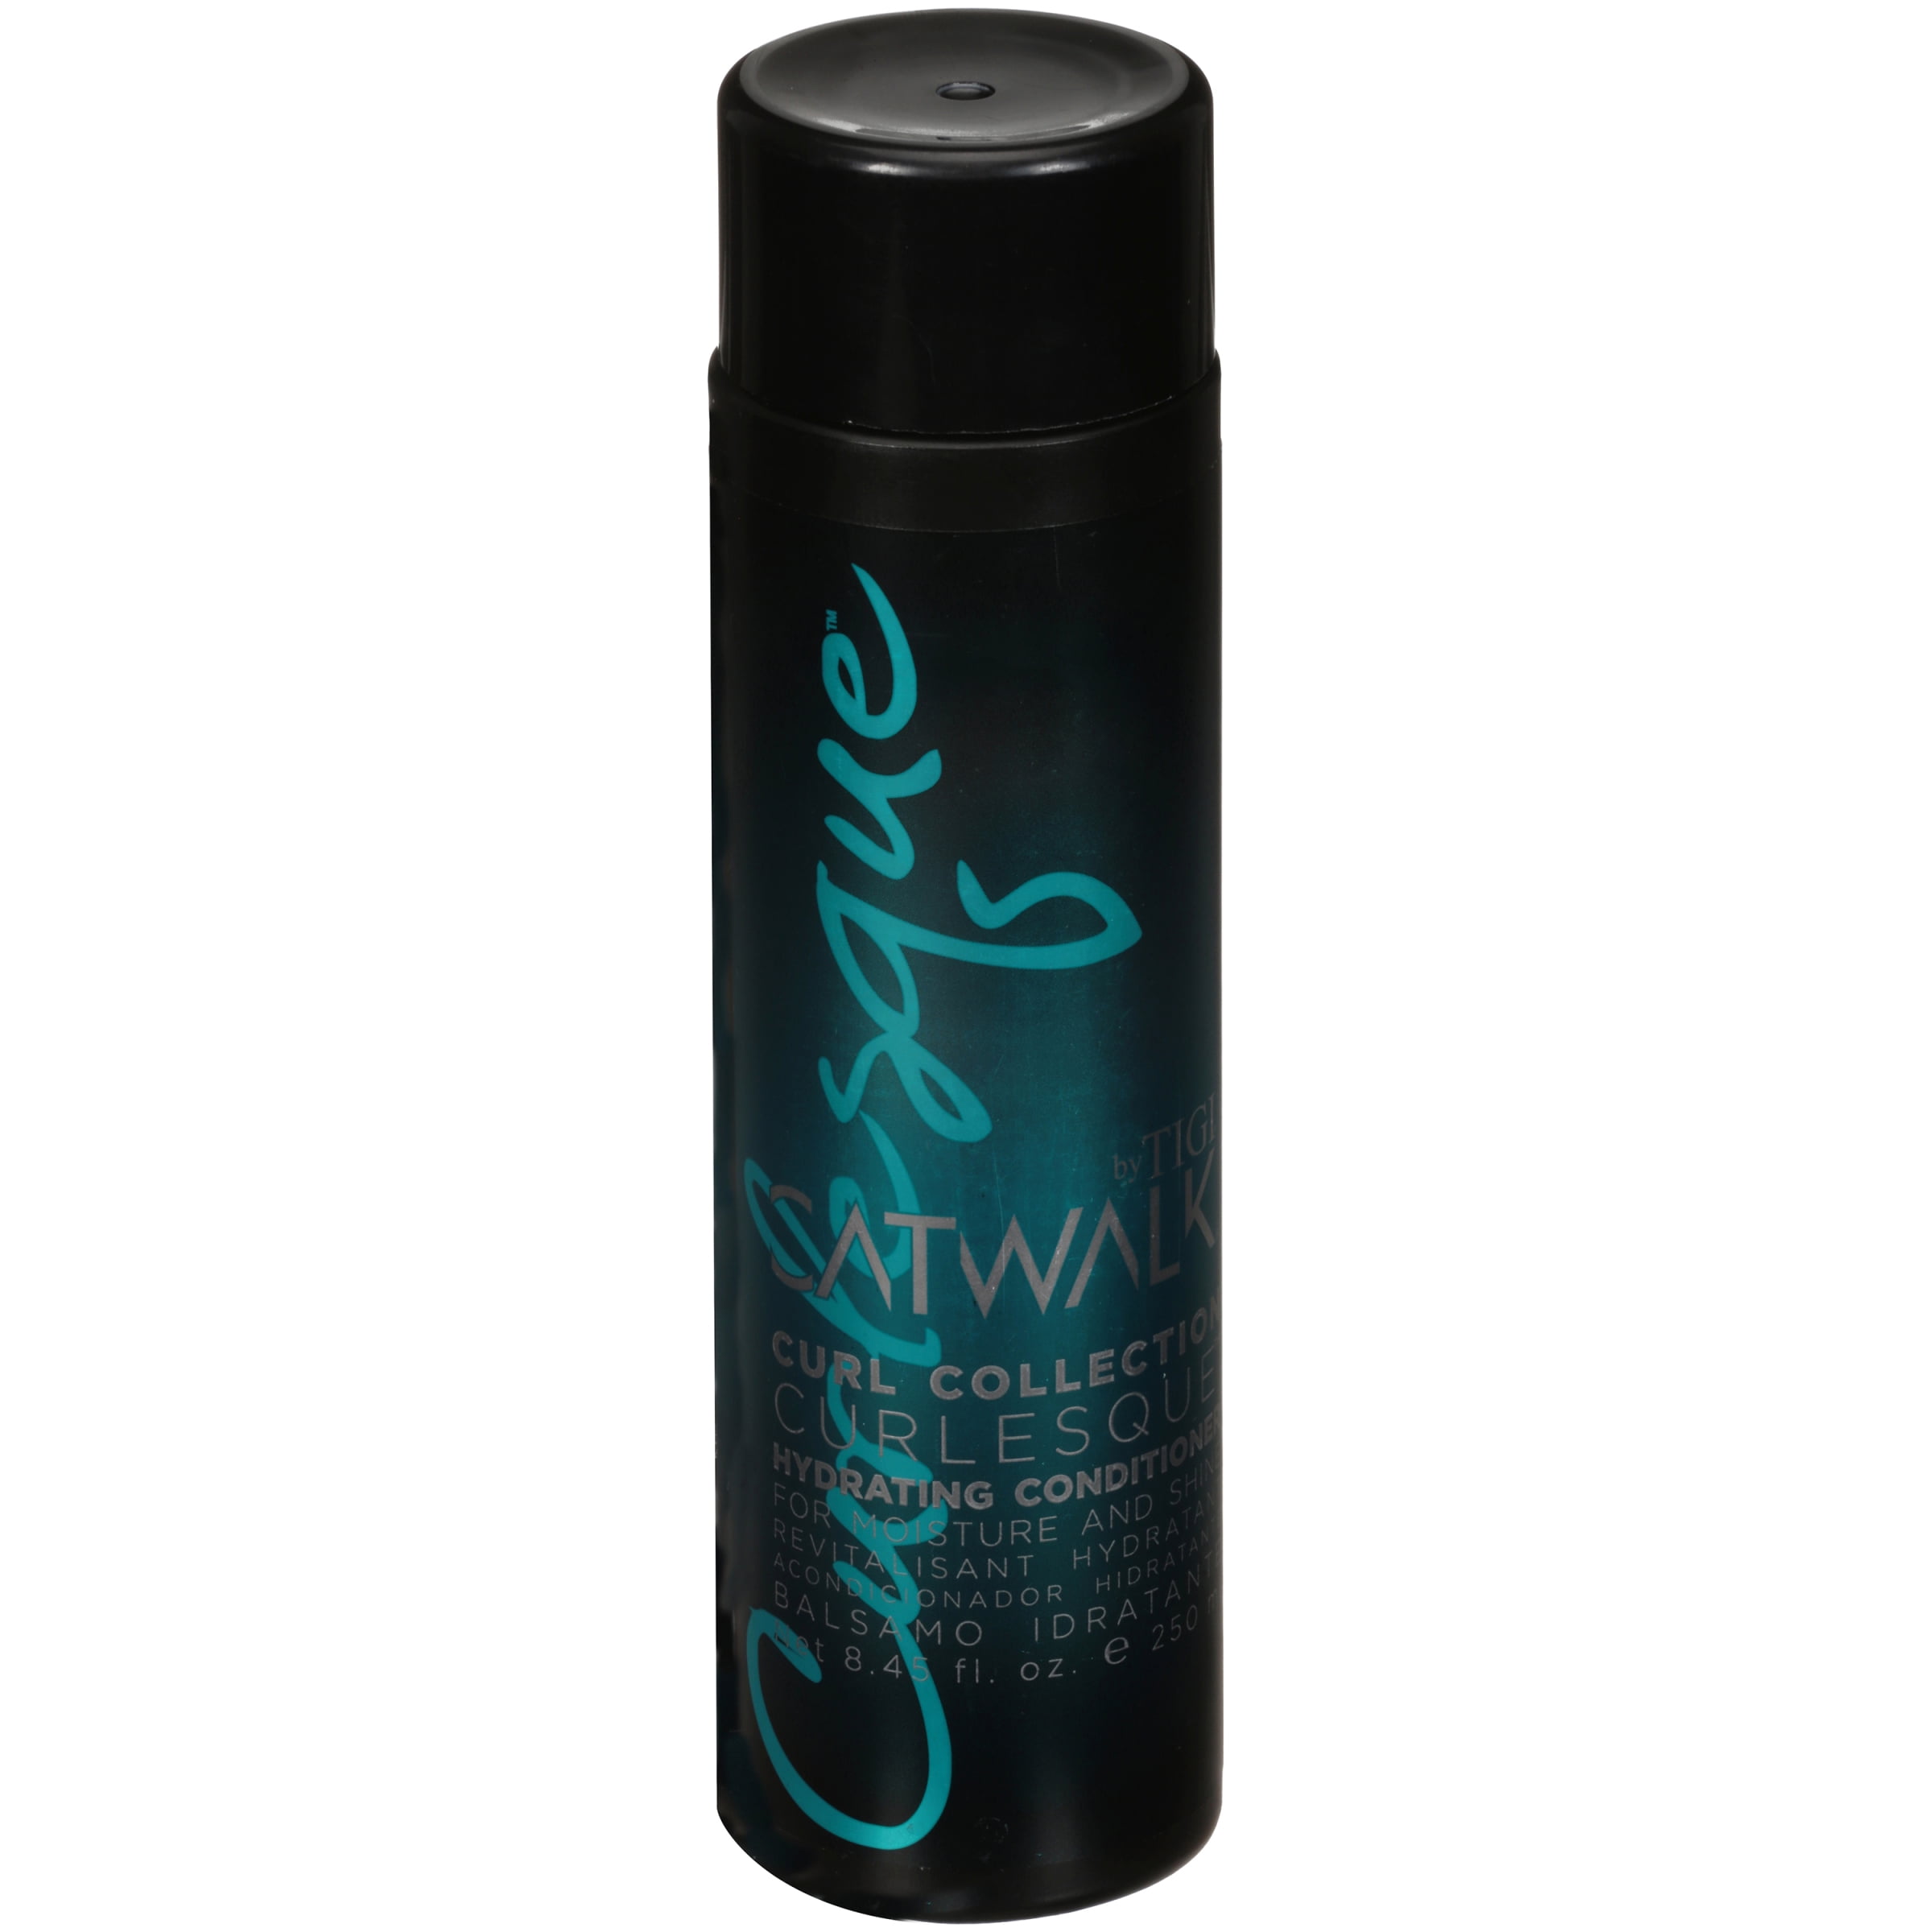 Catwalk by TIGI® Curlesque™ Collection Hydrating Conditioner fl. Bottle -